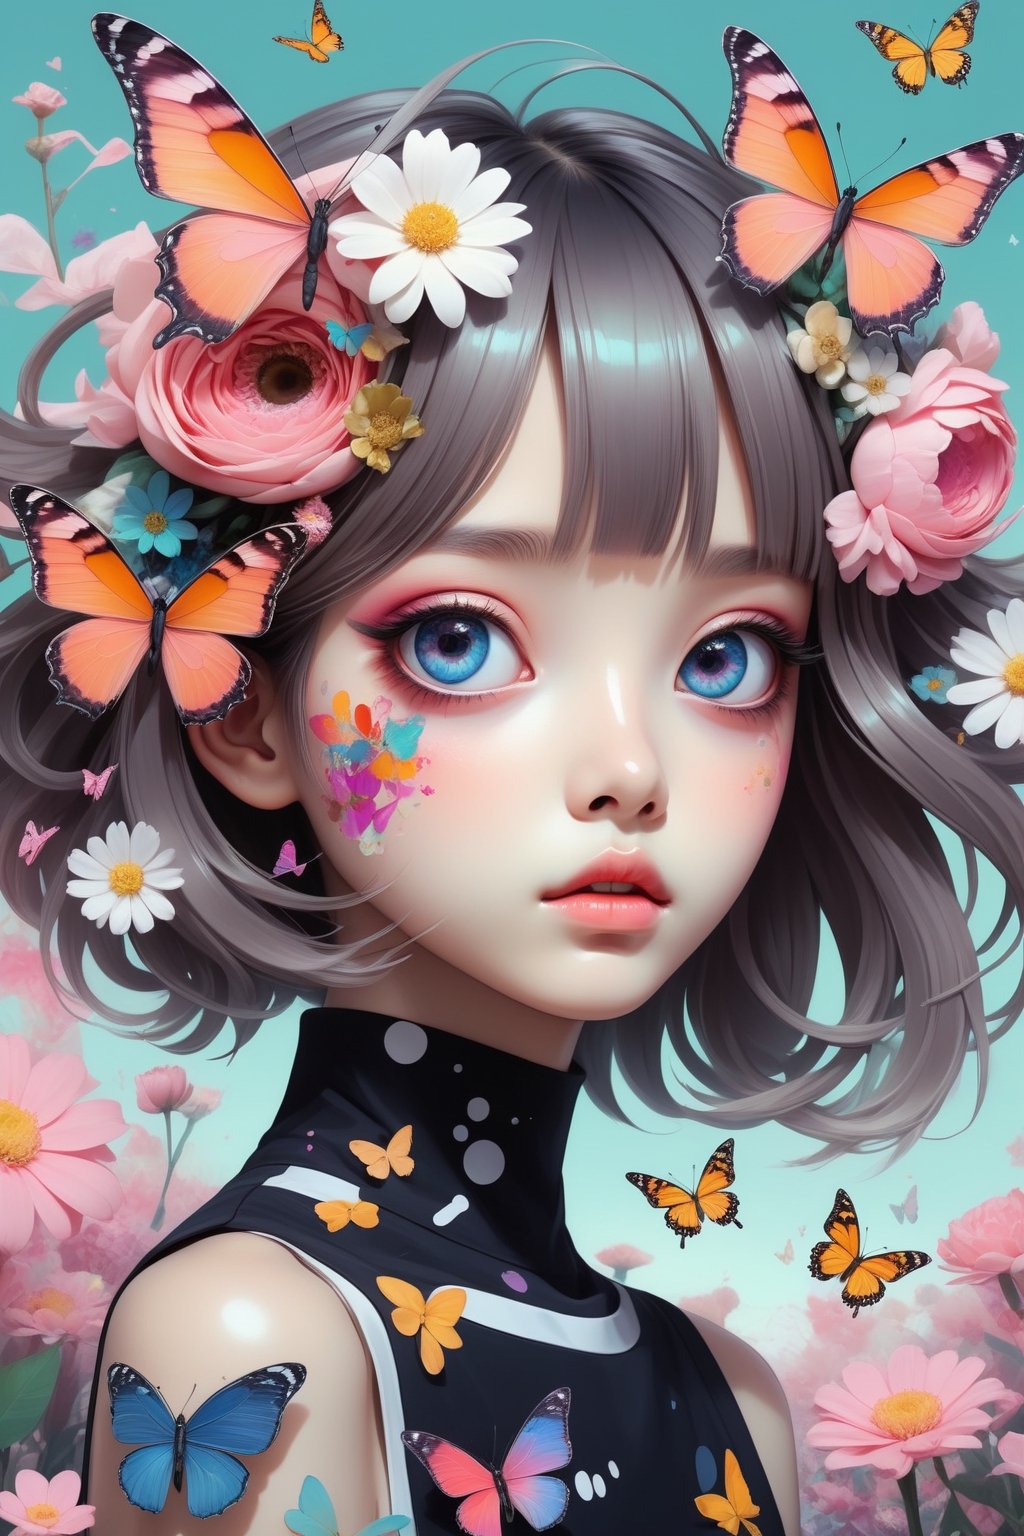 (masterpiece:1.1),(highest quality:1.1),(HDR:1),ambient light,ultra-high quality,( ultra detailed original illustration),(1girl, upper body),((harajuku fashion)),((flowers with human eyes, flower eyes)),double exposure,fusion of fluid abstract art,glitch,(original illustration composition),(fusion of limited color, maximalism artstyle, geometric artstyle, butterflies, junk art), (beautiful, cute, innocent, blush), more detail XL